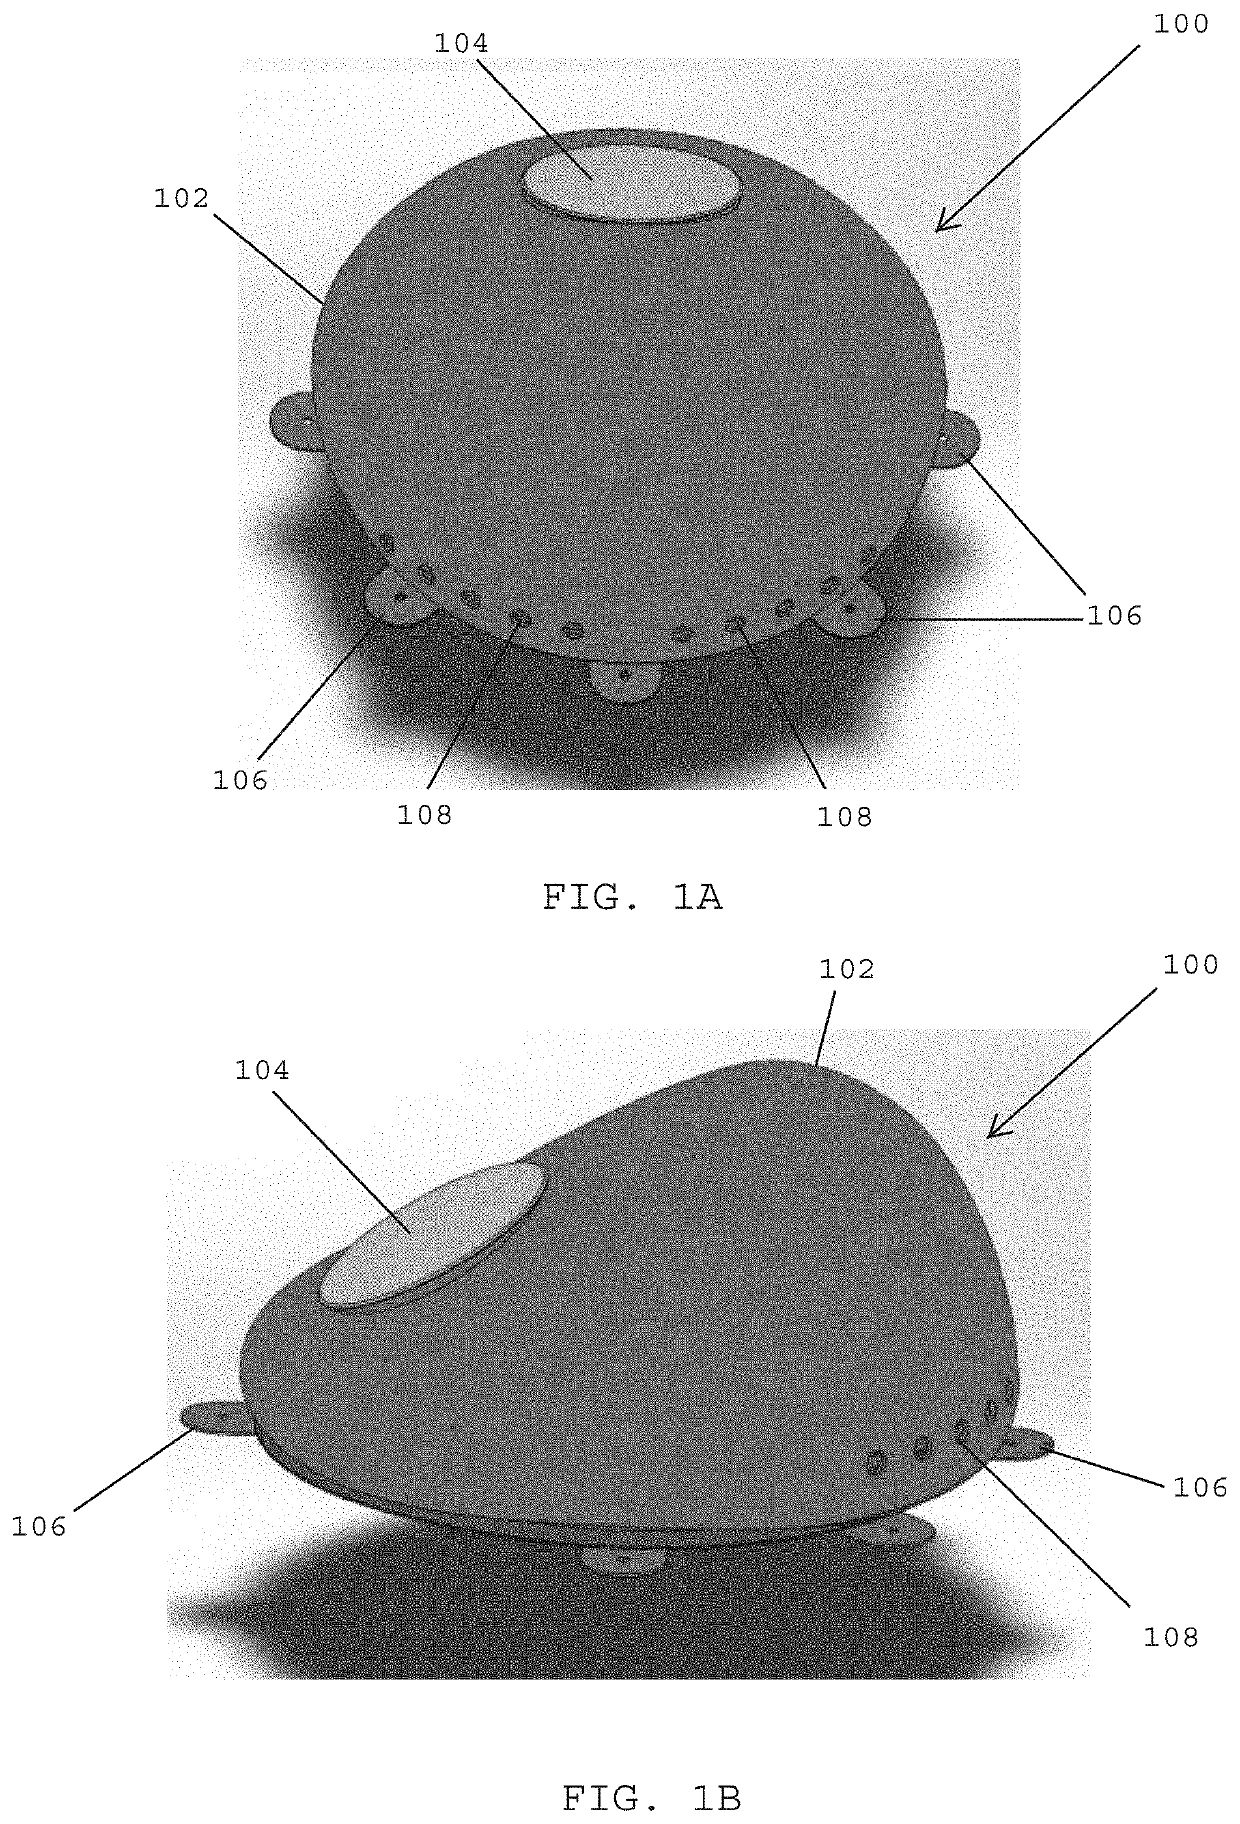 Tissue expanders having integrated drainage and moveable barrier membranes